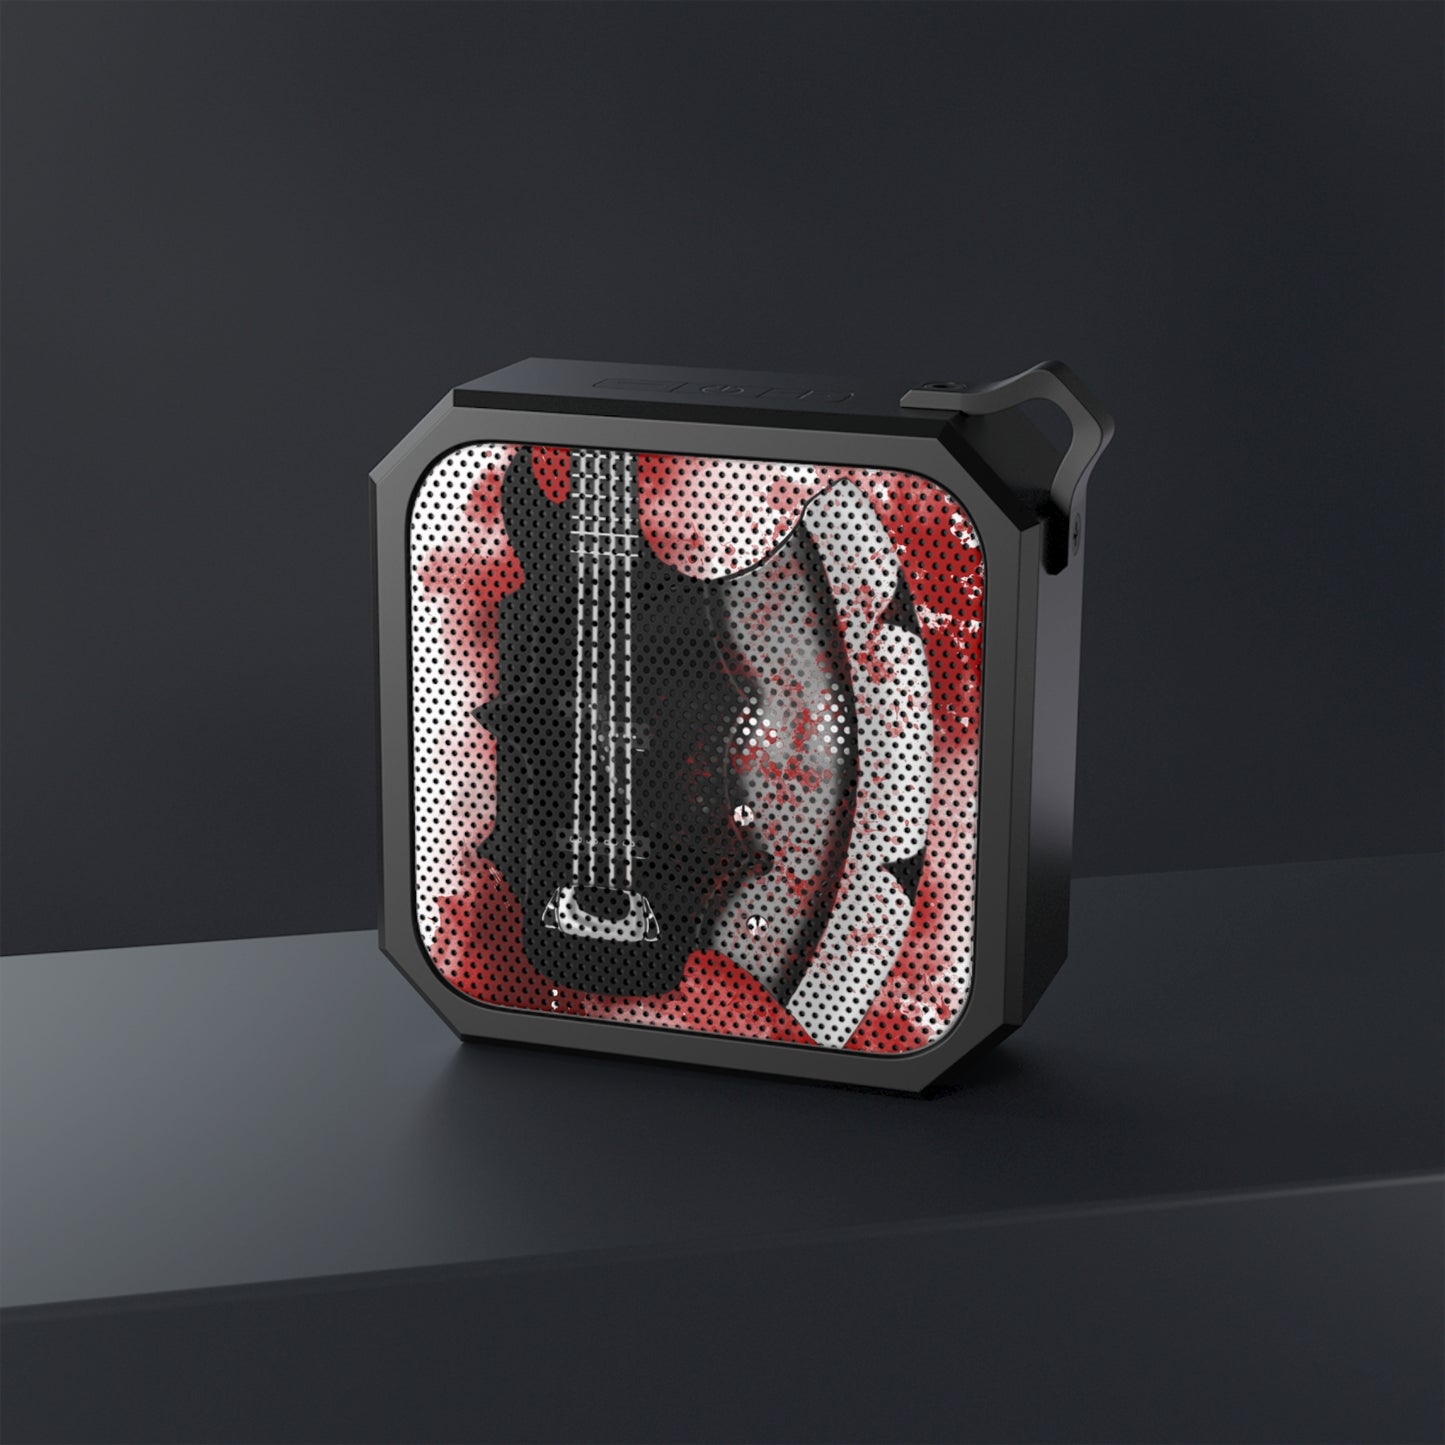 Digital painting of an axe bass guitar printed on a bluetooth speaker